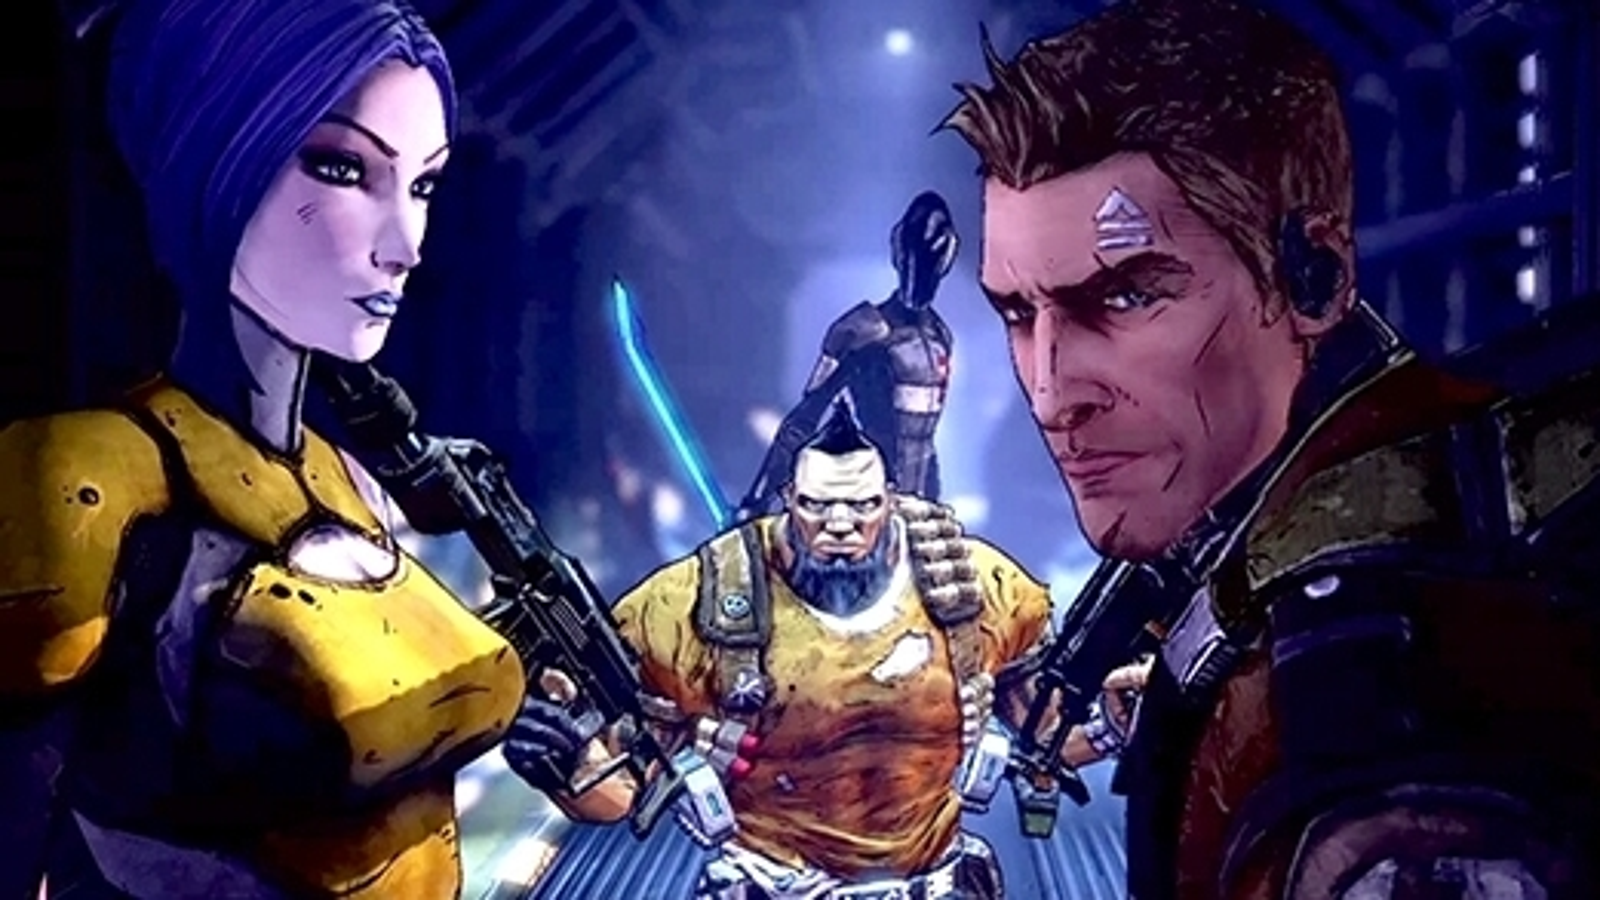 borderlands 2 all characters